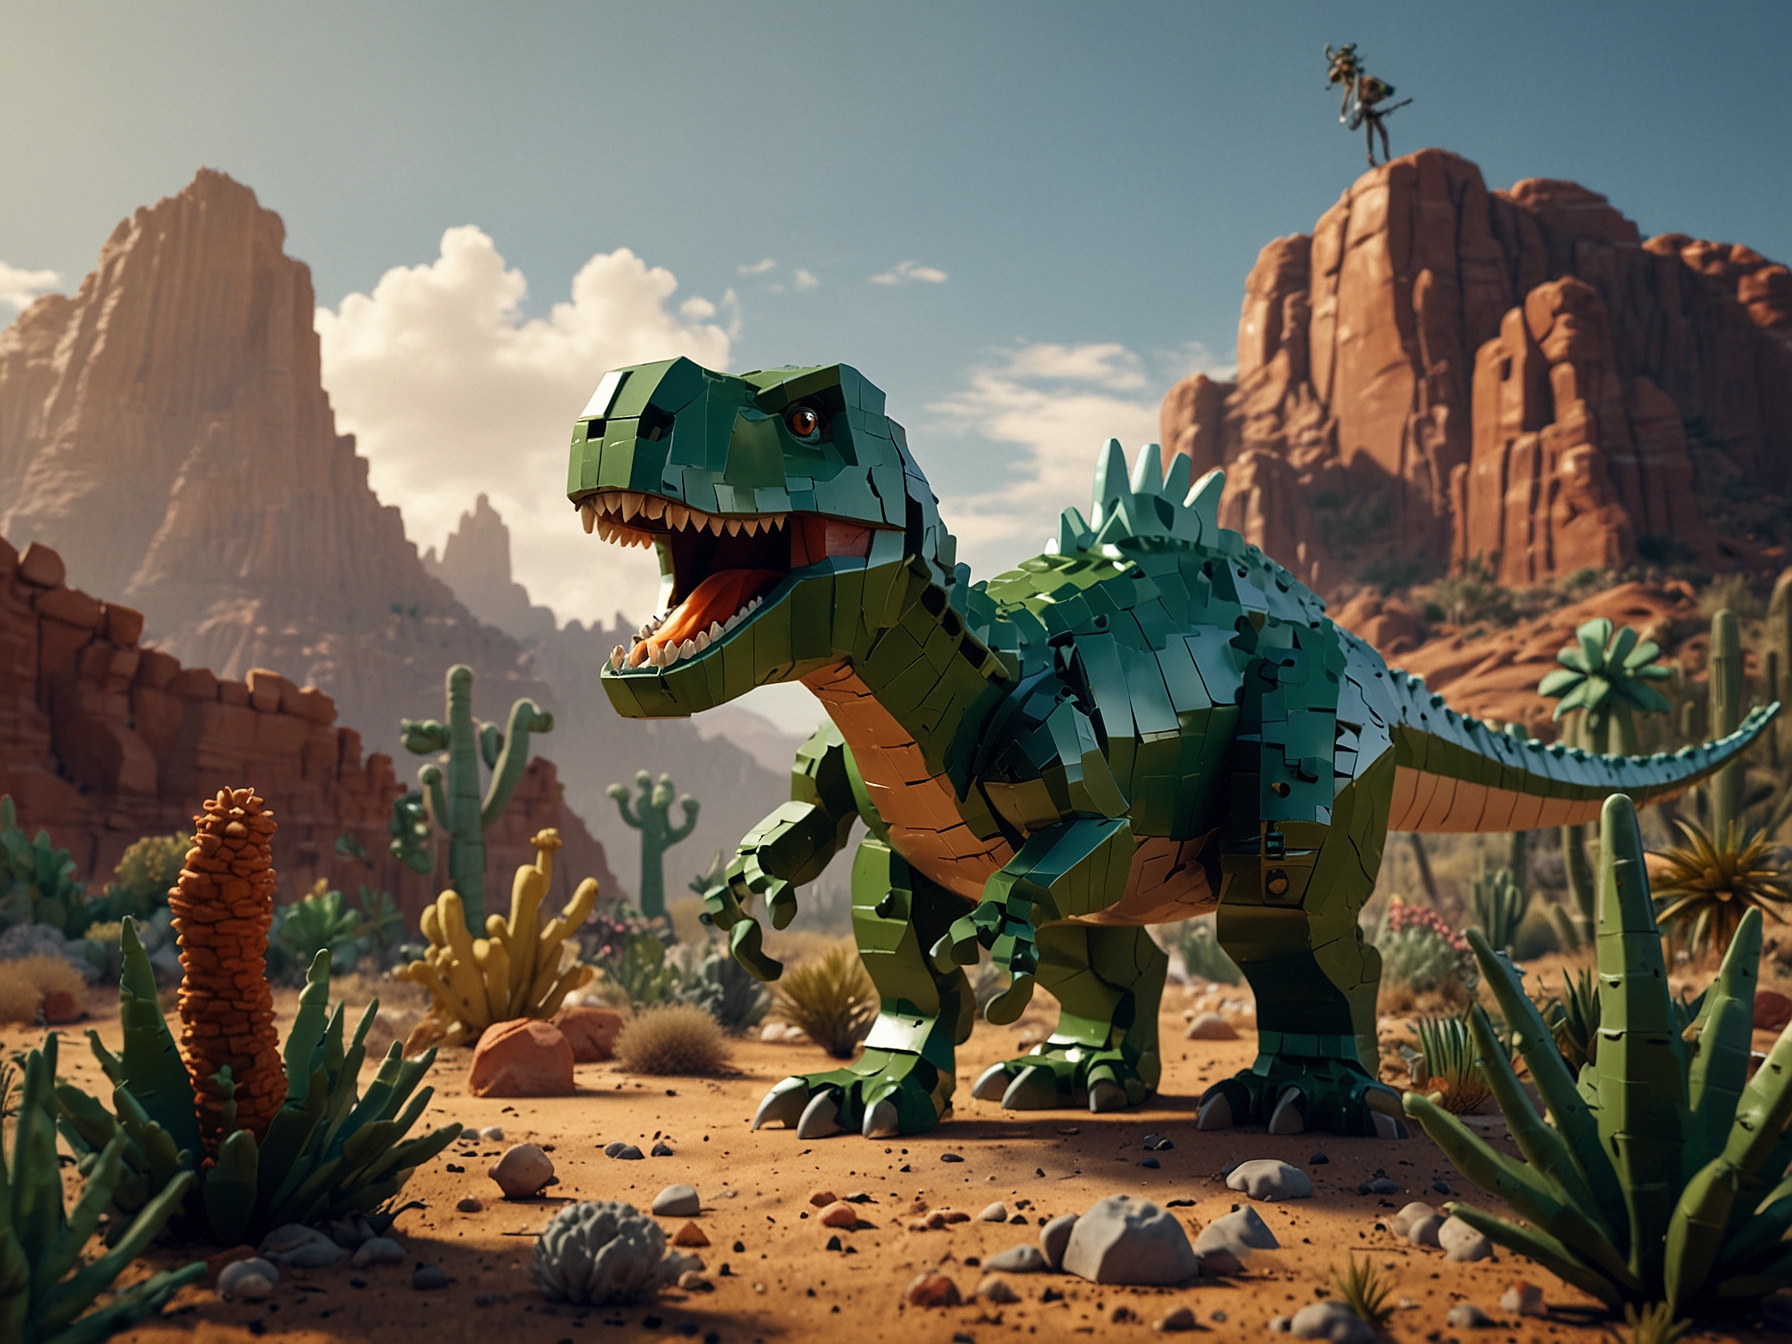 A completed LEGO-like Chrome Dino set, showing the pixelated dinosaur alongside its familiar in-game obstacles like cacti, perfectly capturing the nostalgic essence of the game.